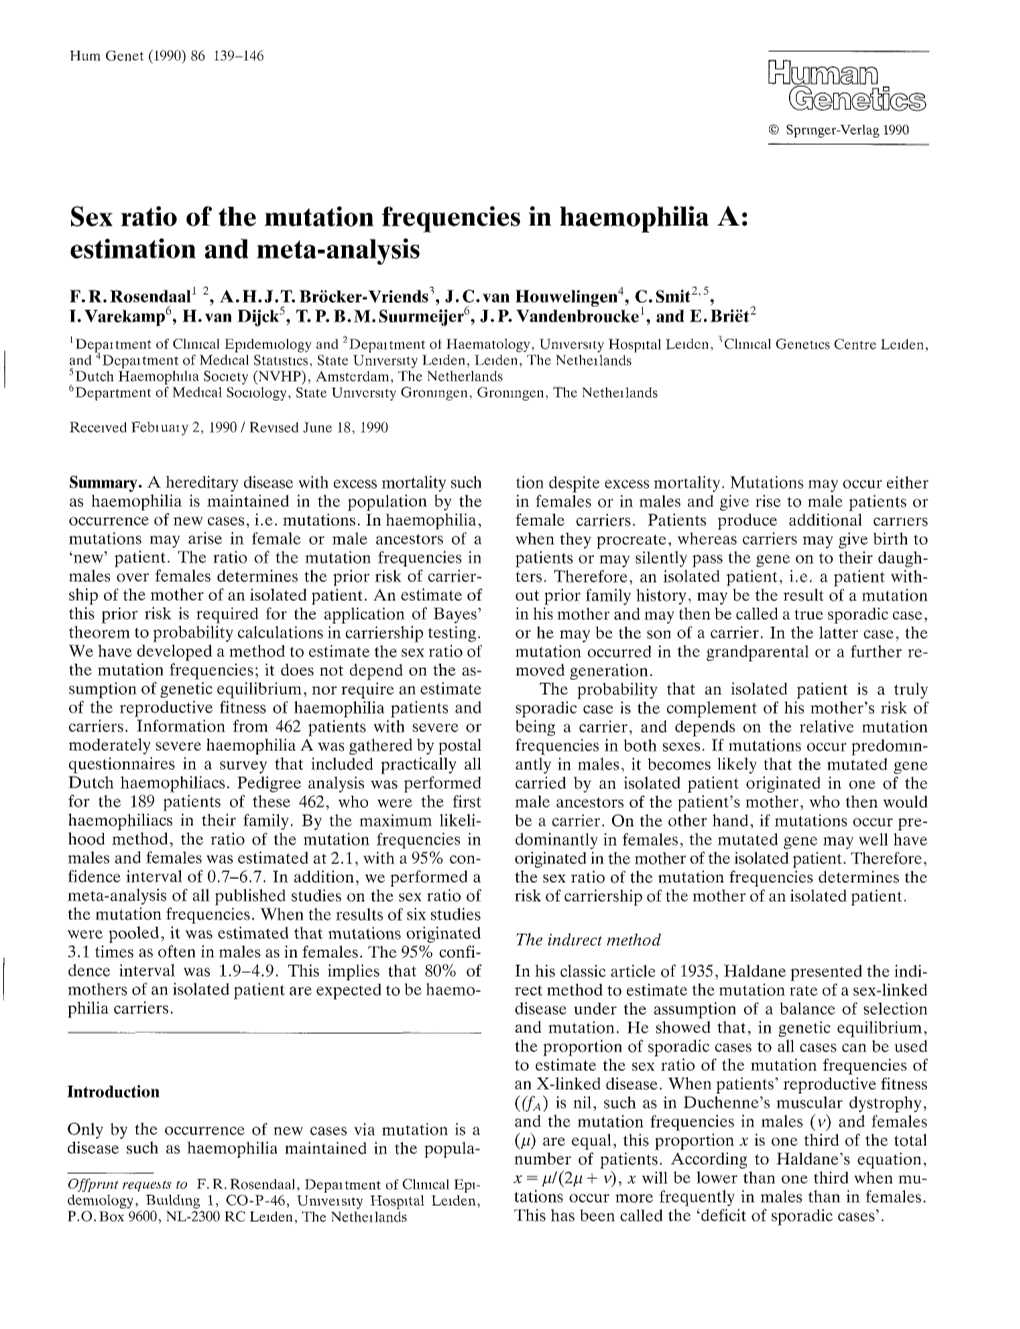 Sex Ratio of the Mutation Frequencies in Haemophilia A: Estimation and Meta-Analysis